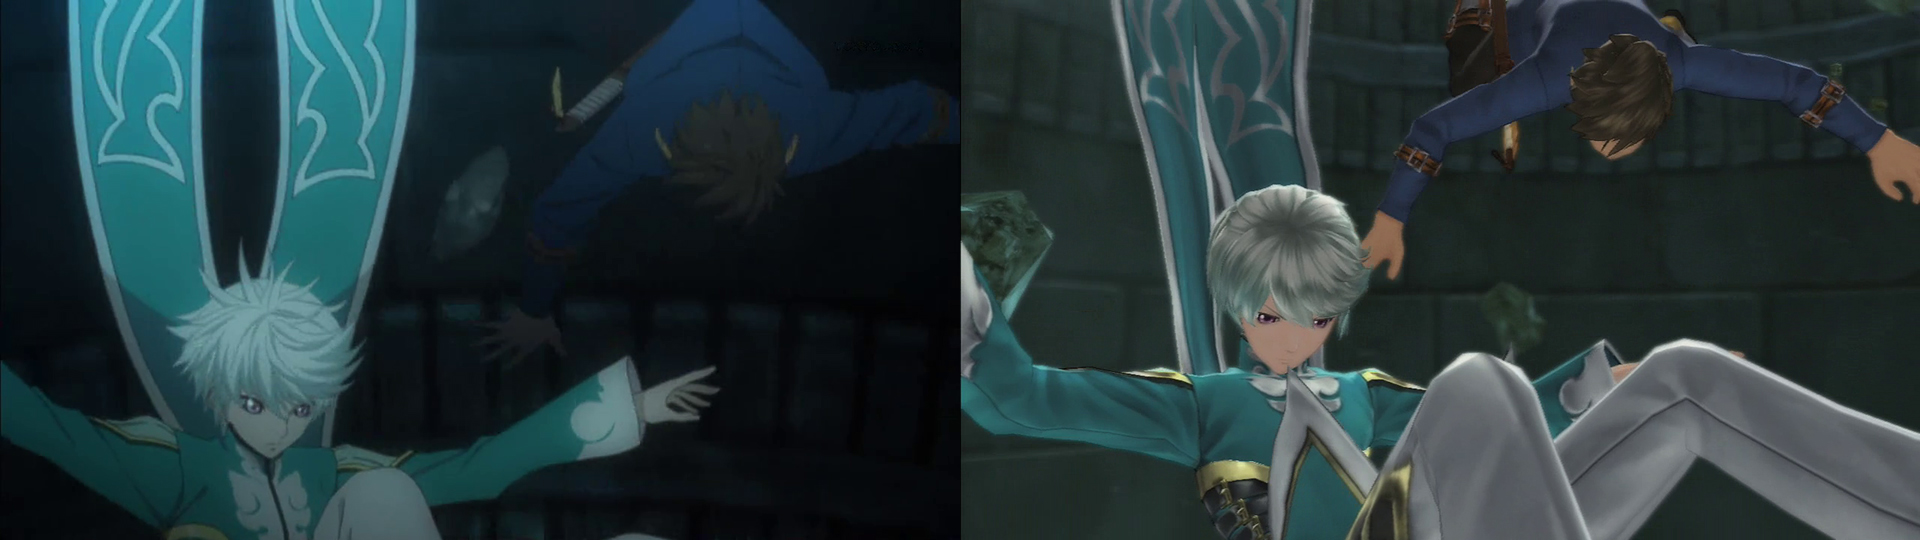 Let’s Compare The Tales Of Zestiria Anime To The Game